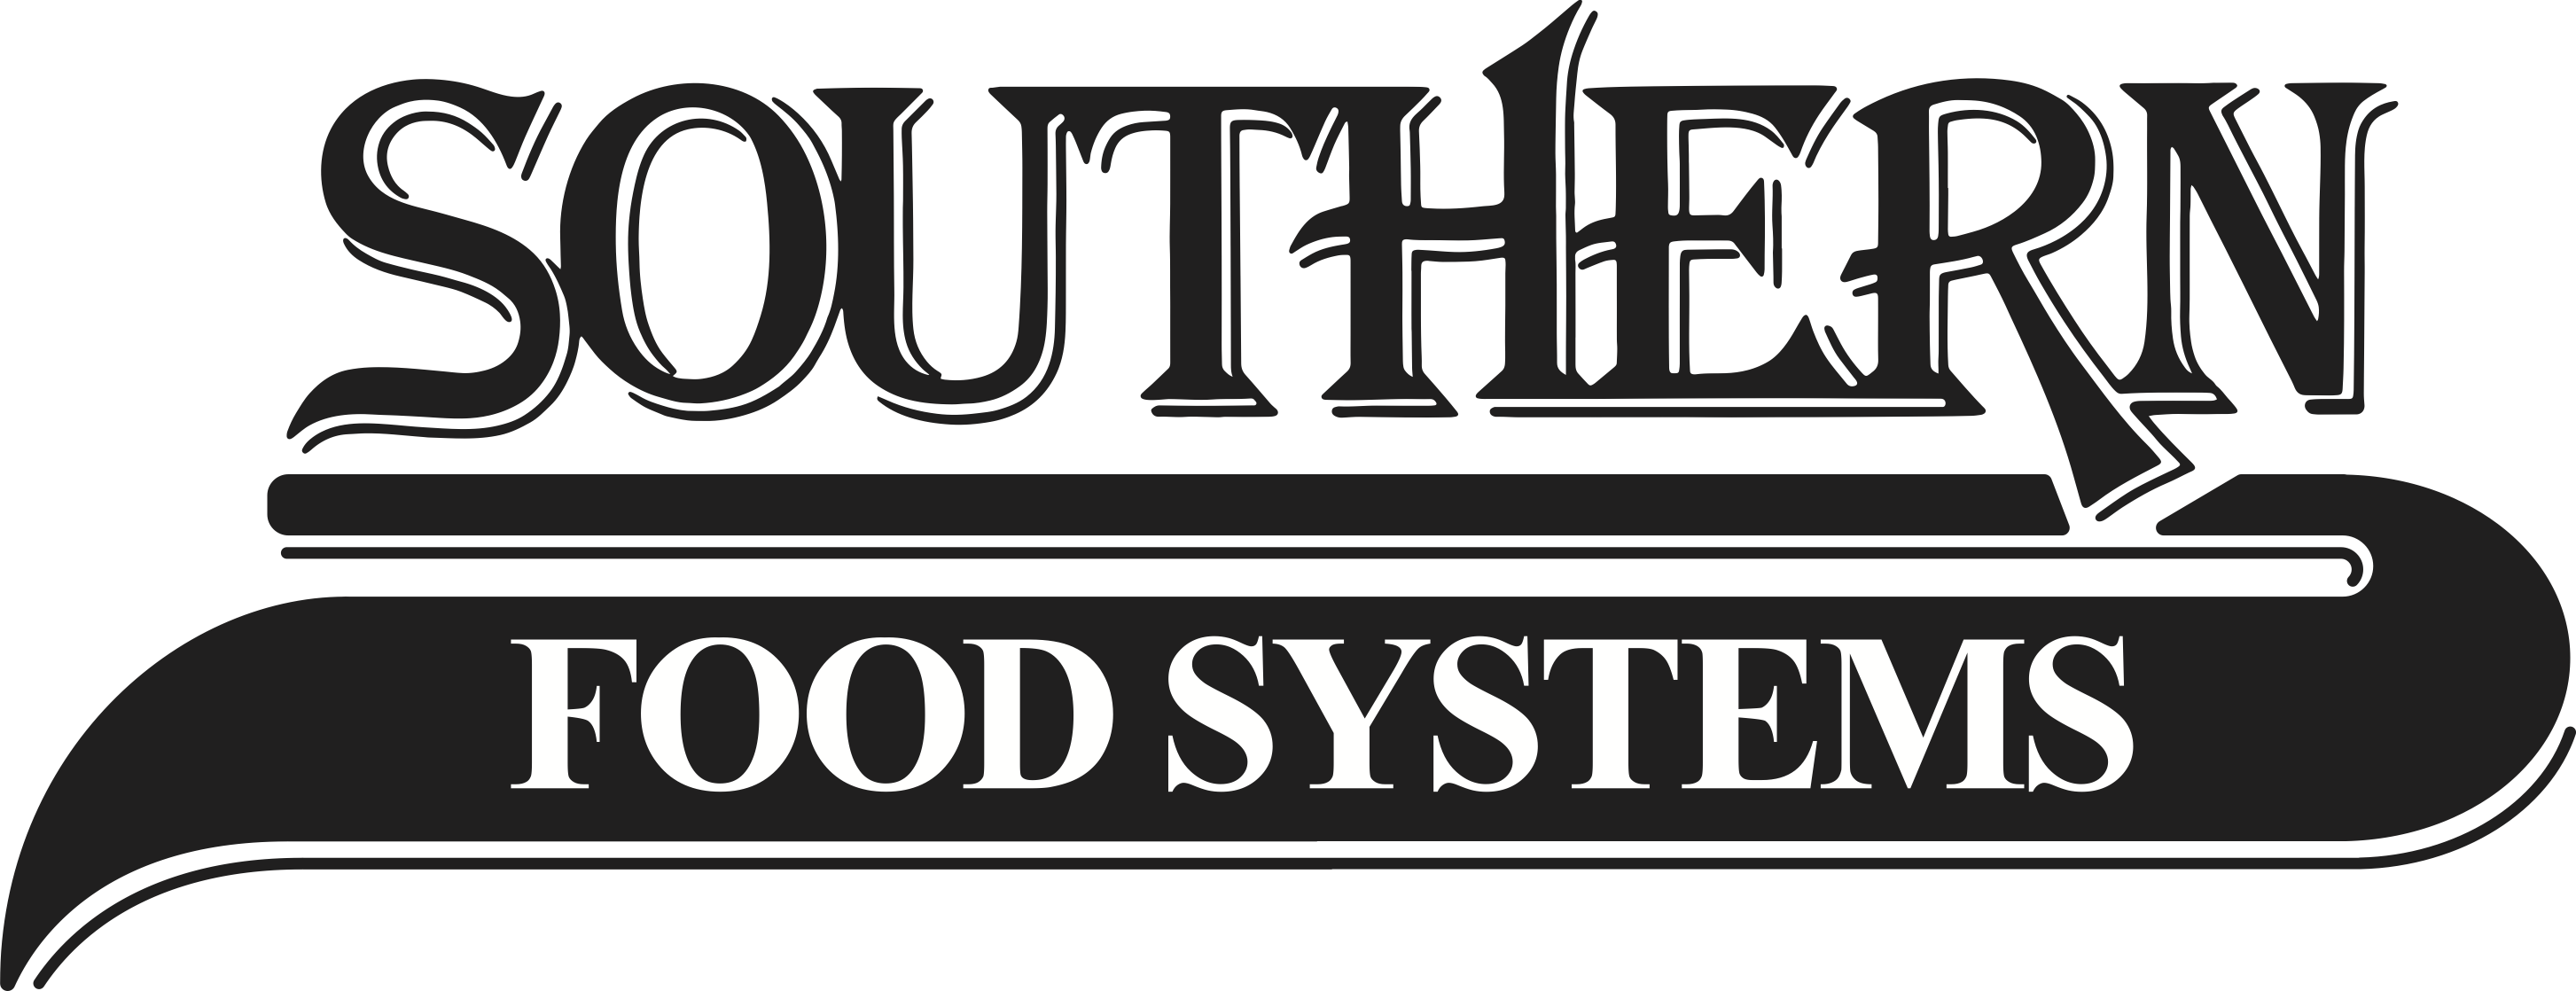 Southern Food Systems